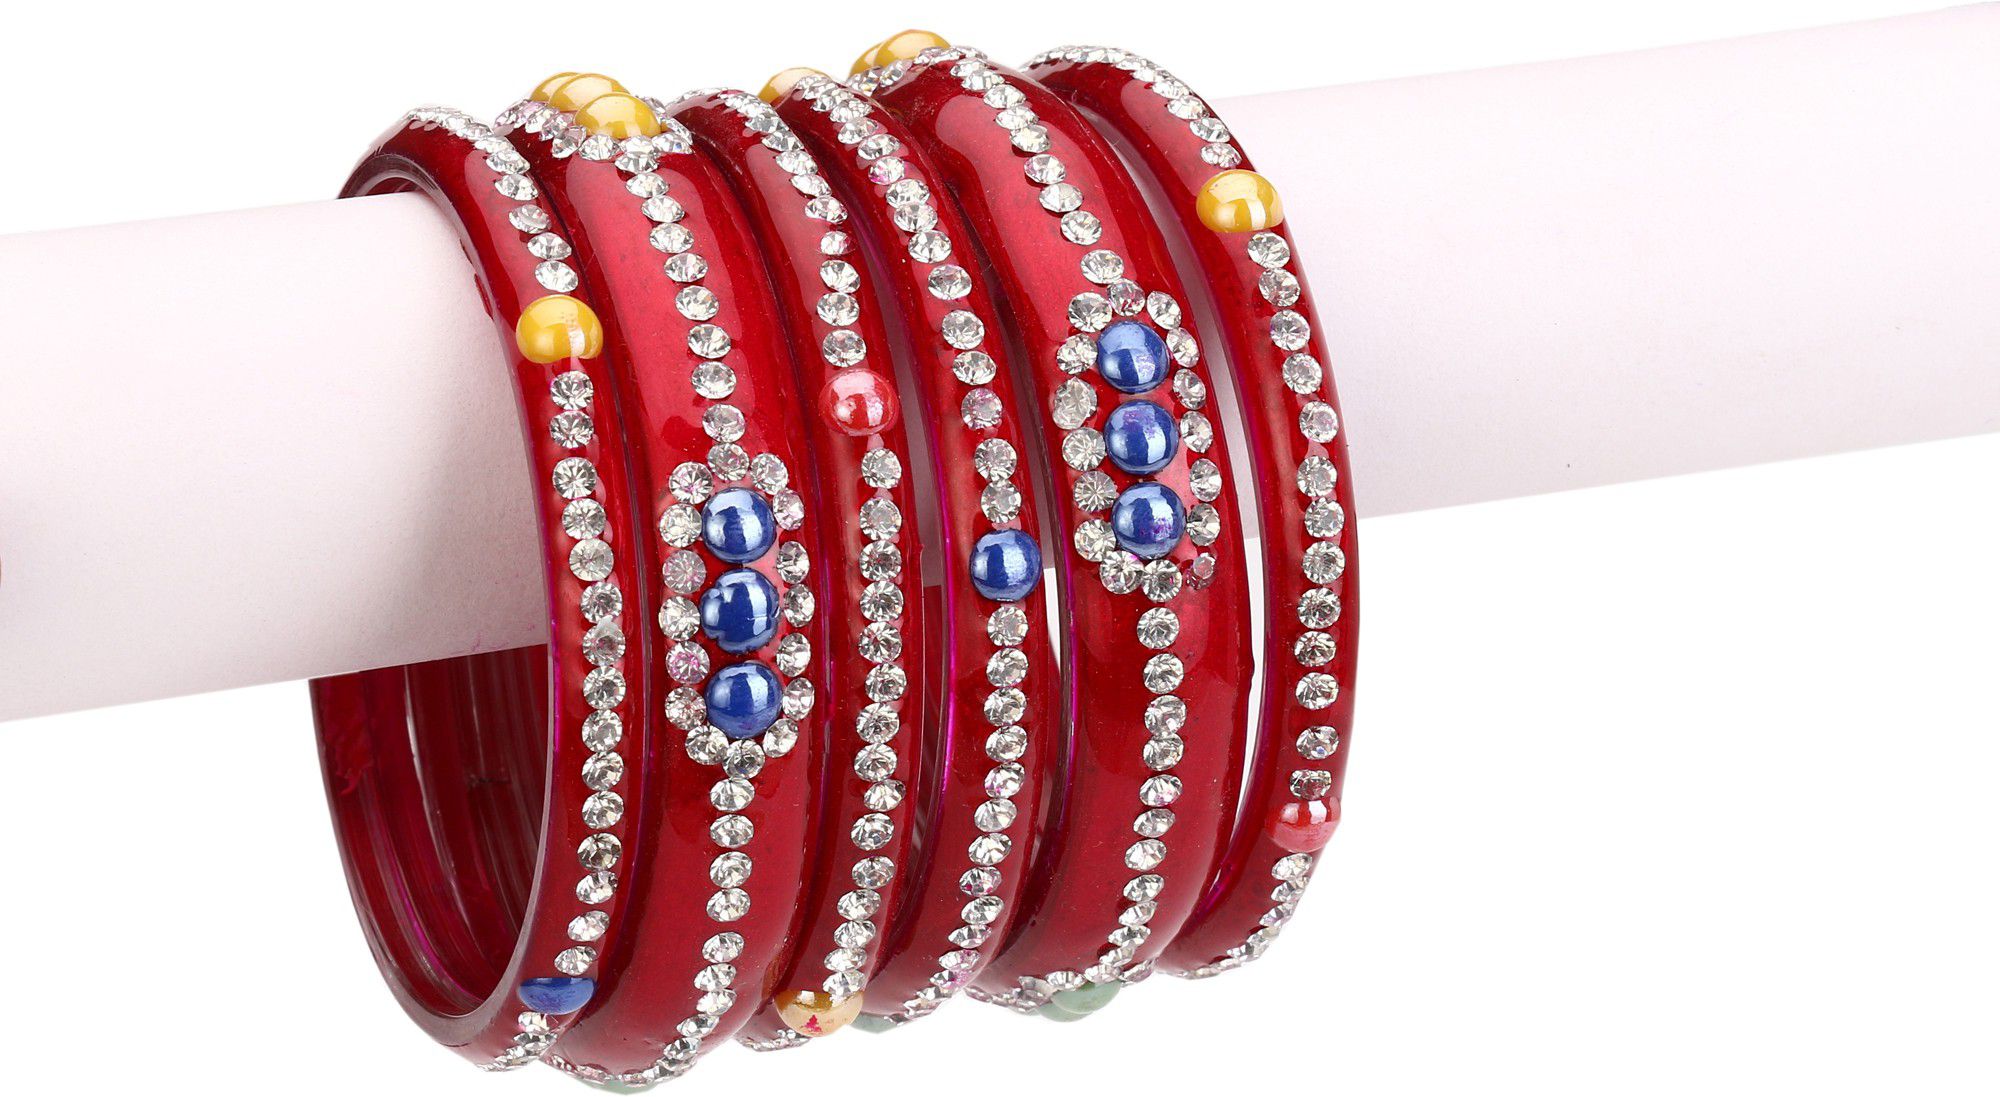     			Somil Red Color 2 & 4 Bangle Set decorative With Colorful Beads & Stones With Safety Box-DR_2.6